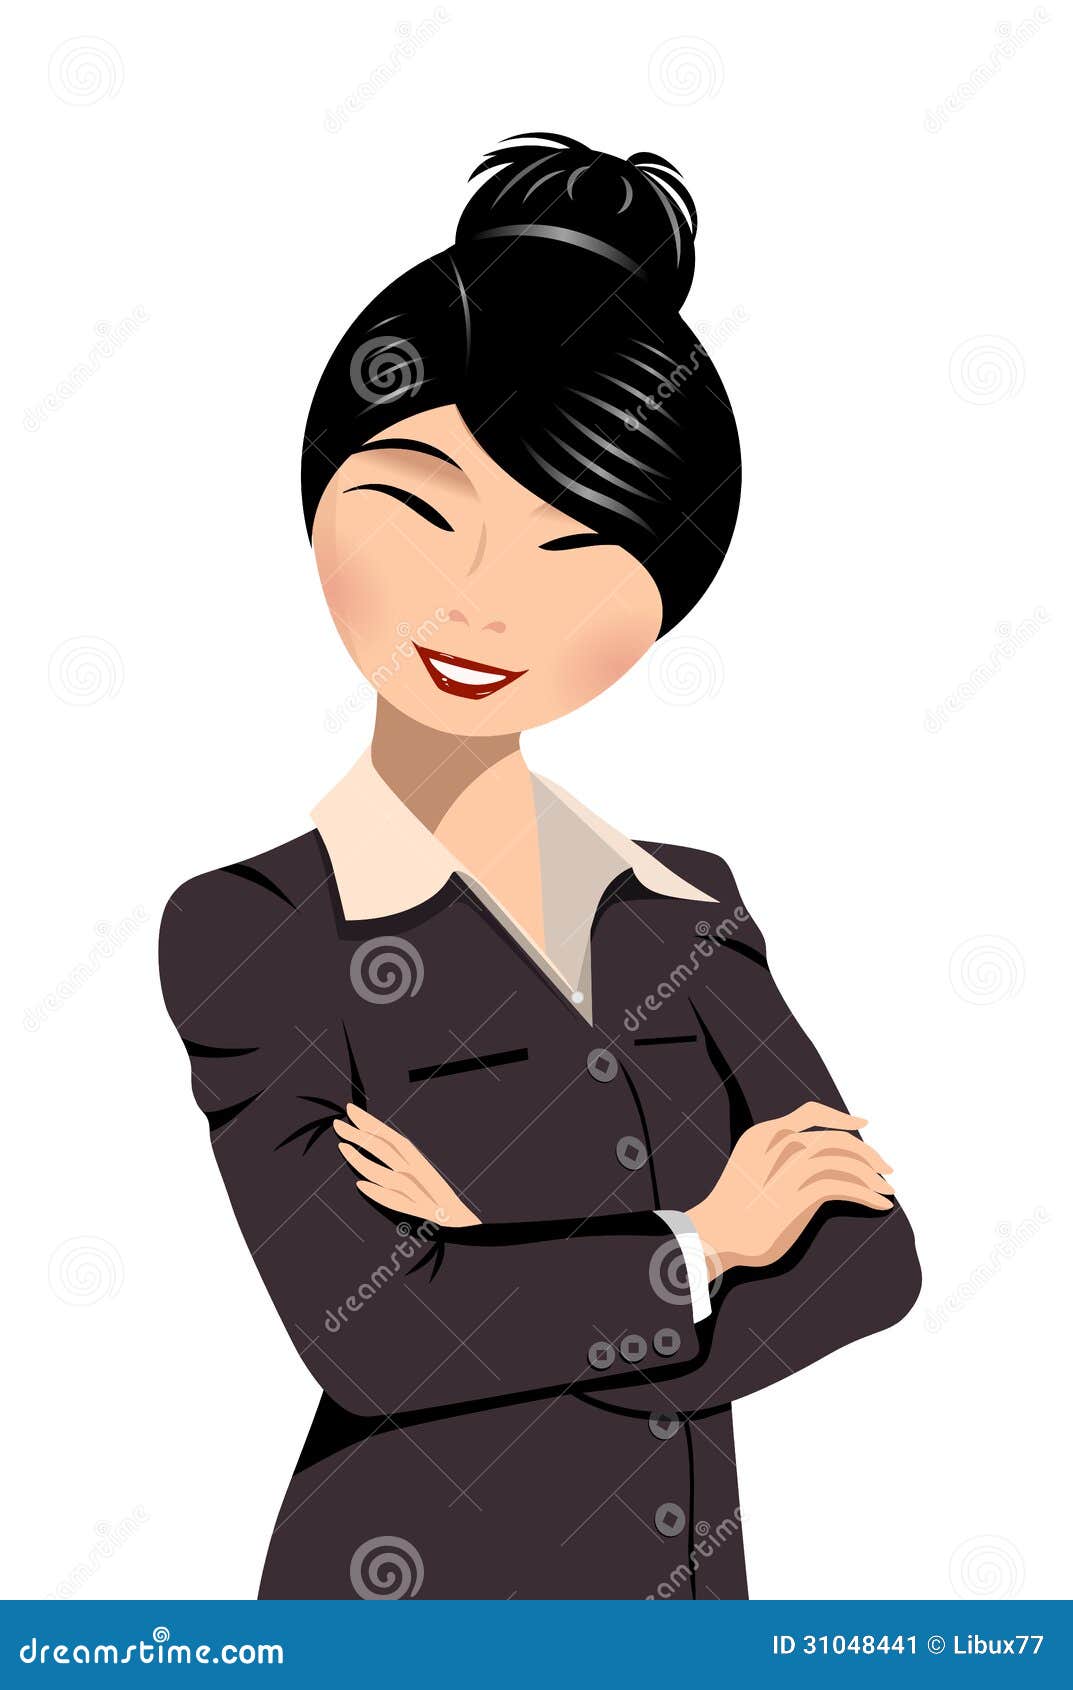 Business Chinese Woman With Folded Arms Stock Image - Image: 31048441